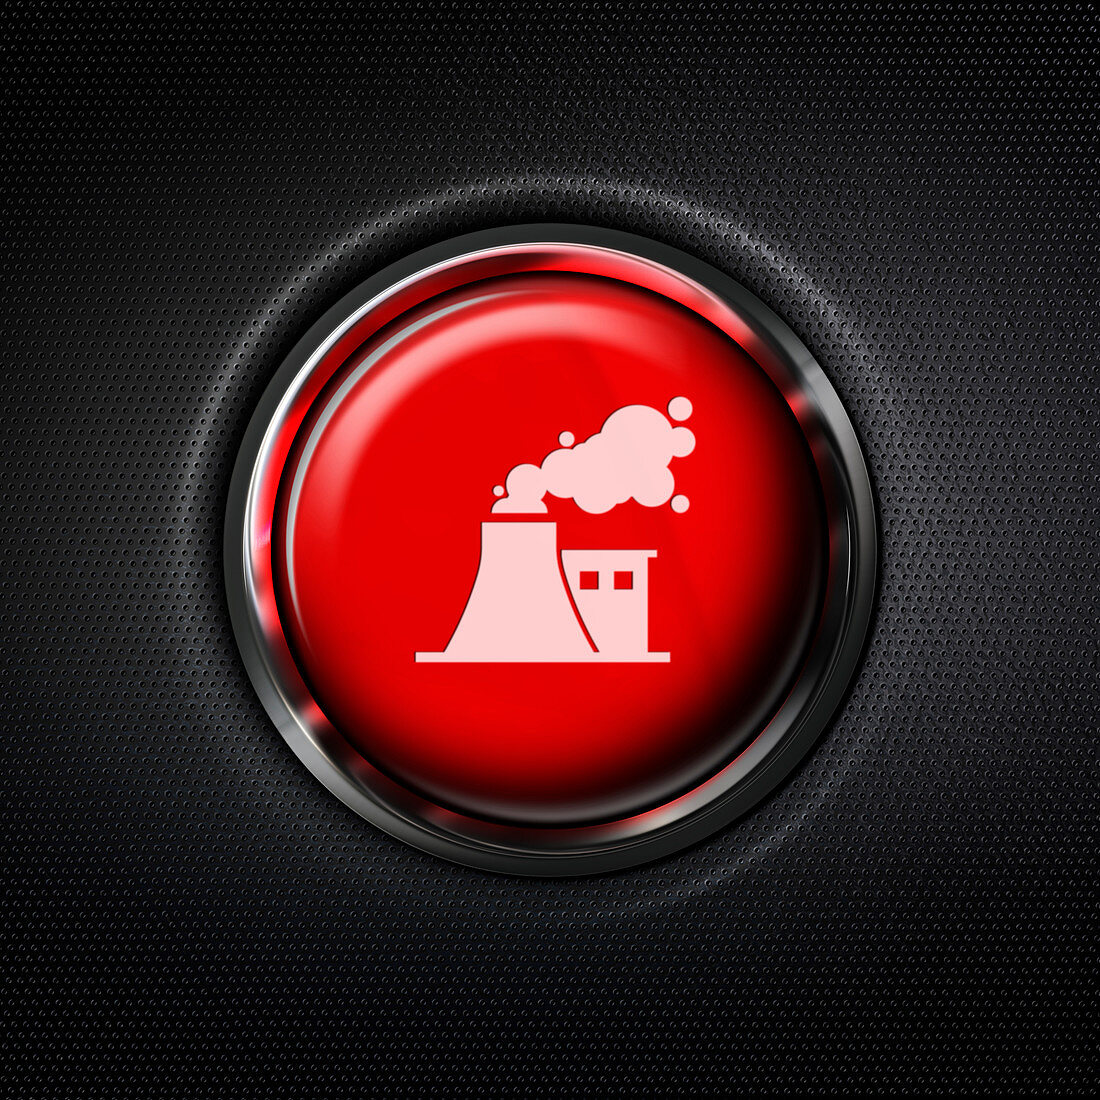 Red factory pollution stop button, composite image